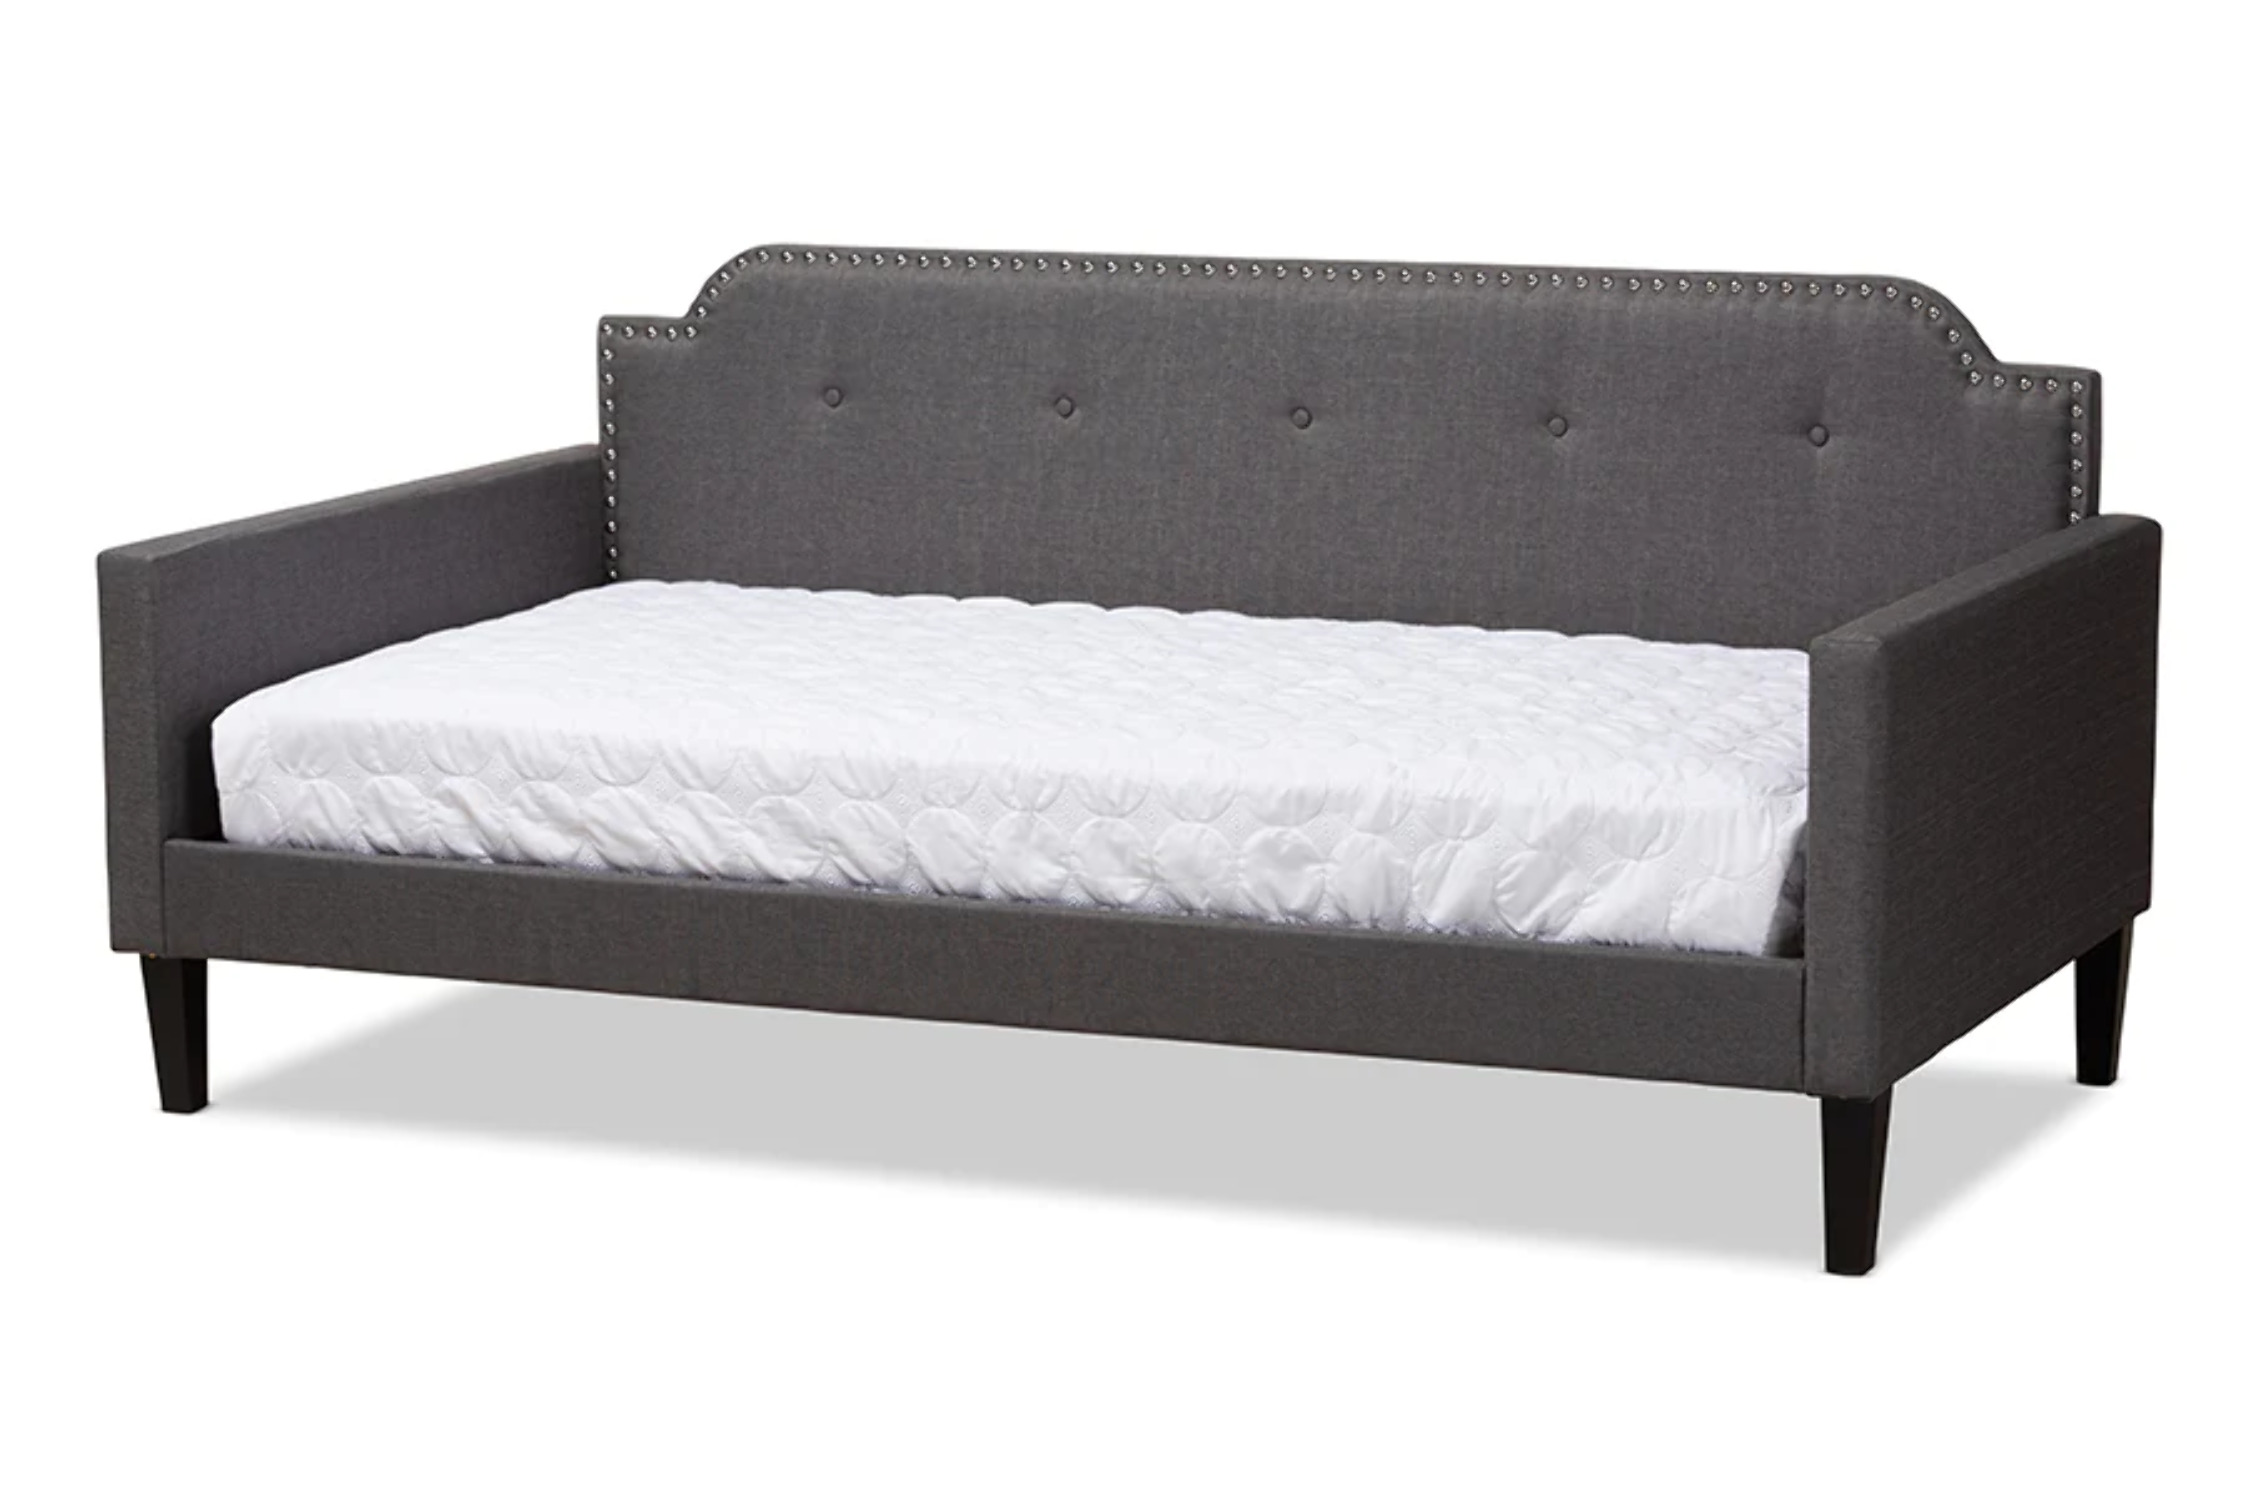 Baxton Studio Packer Modern and Contemporary Grey Fabric Upholstered Twin Size Sofa Daybed - image 2 of 7